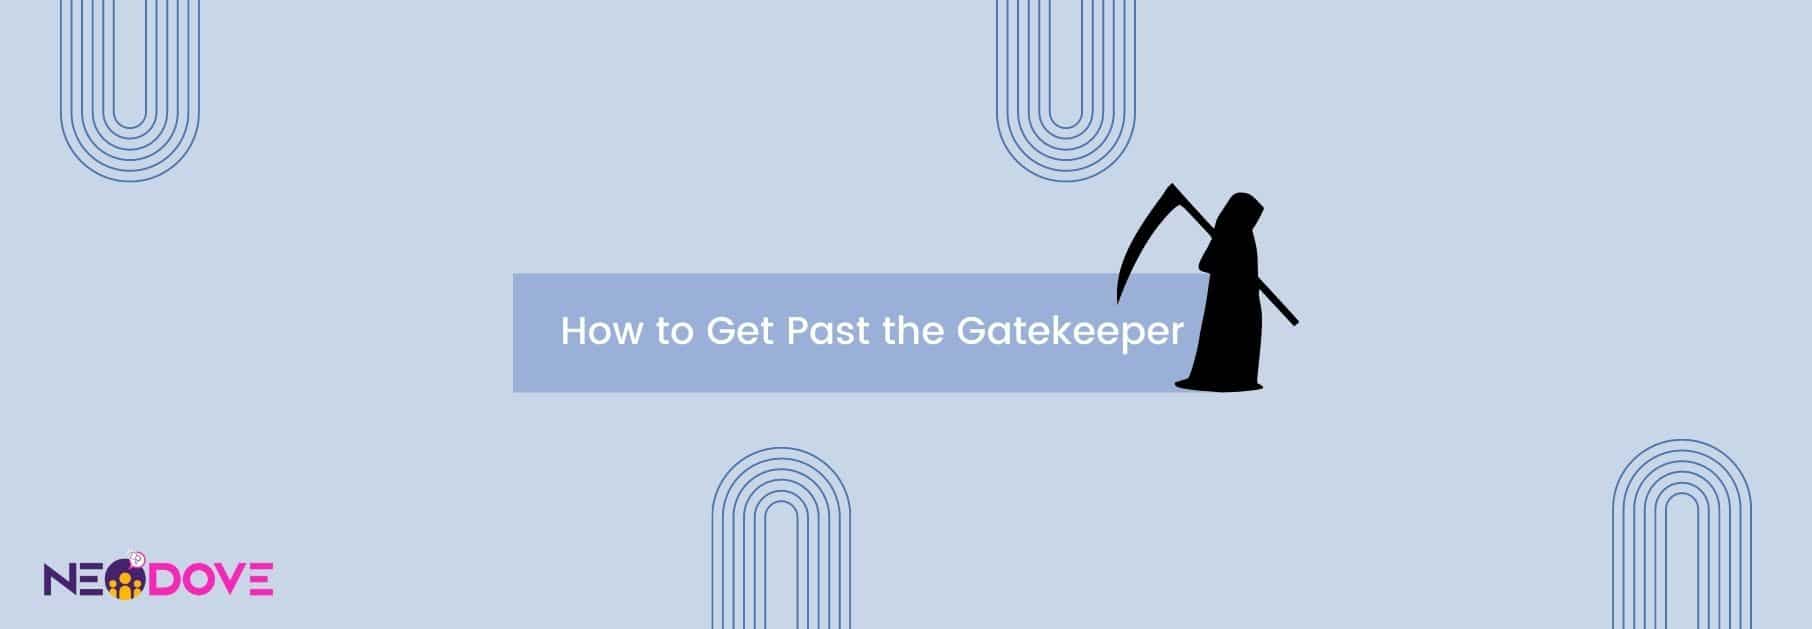 How to Get Past the Gatekeeper